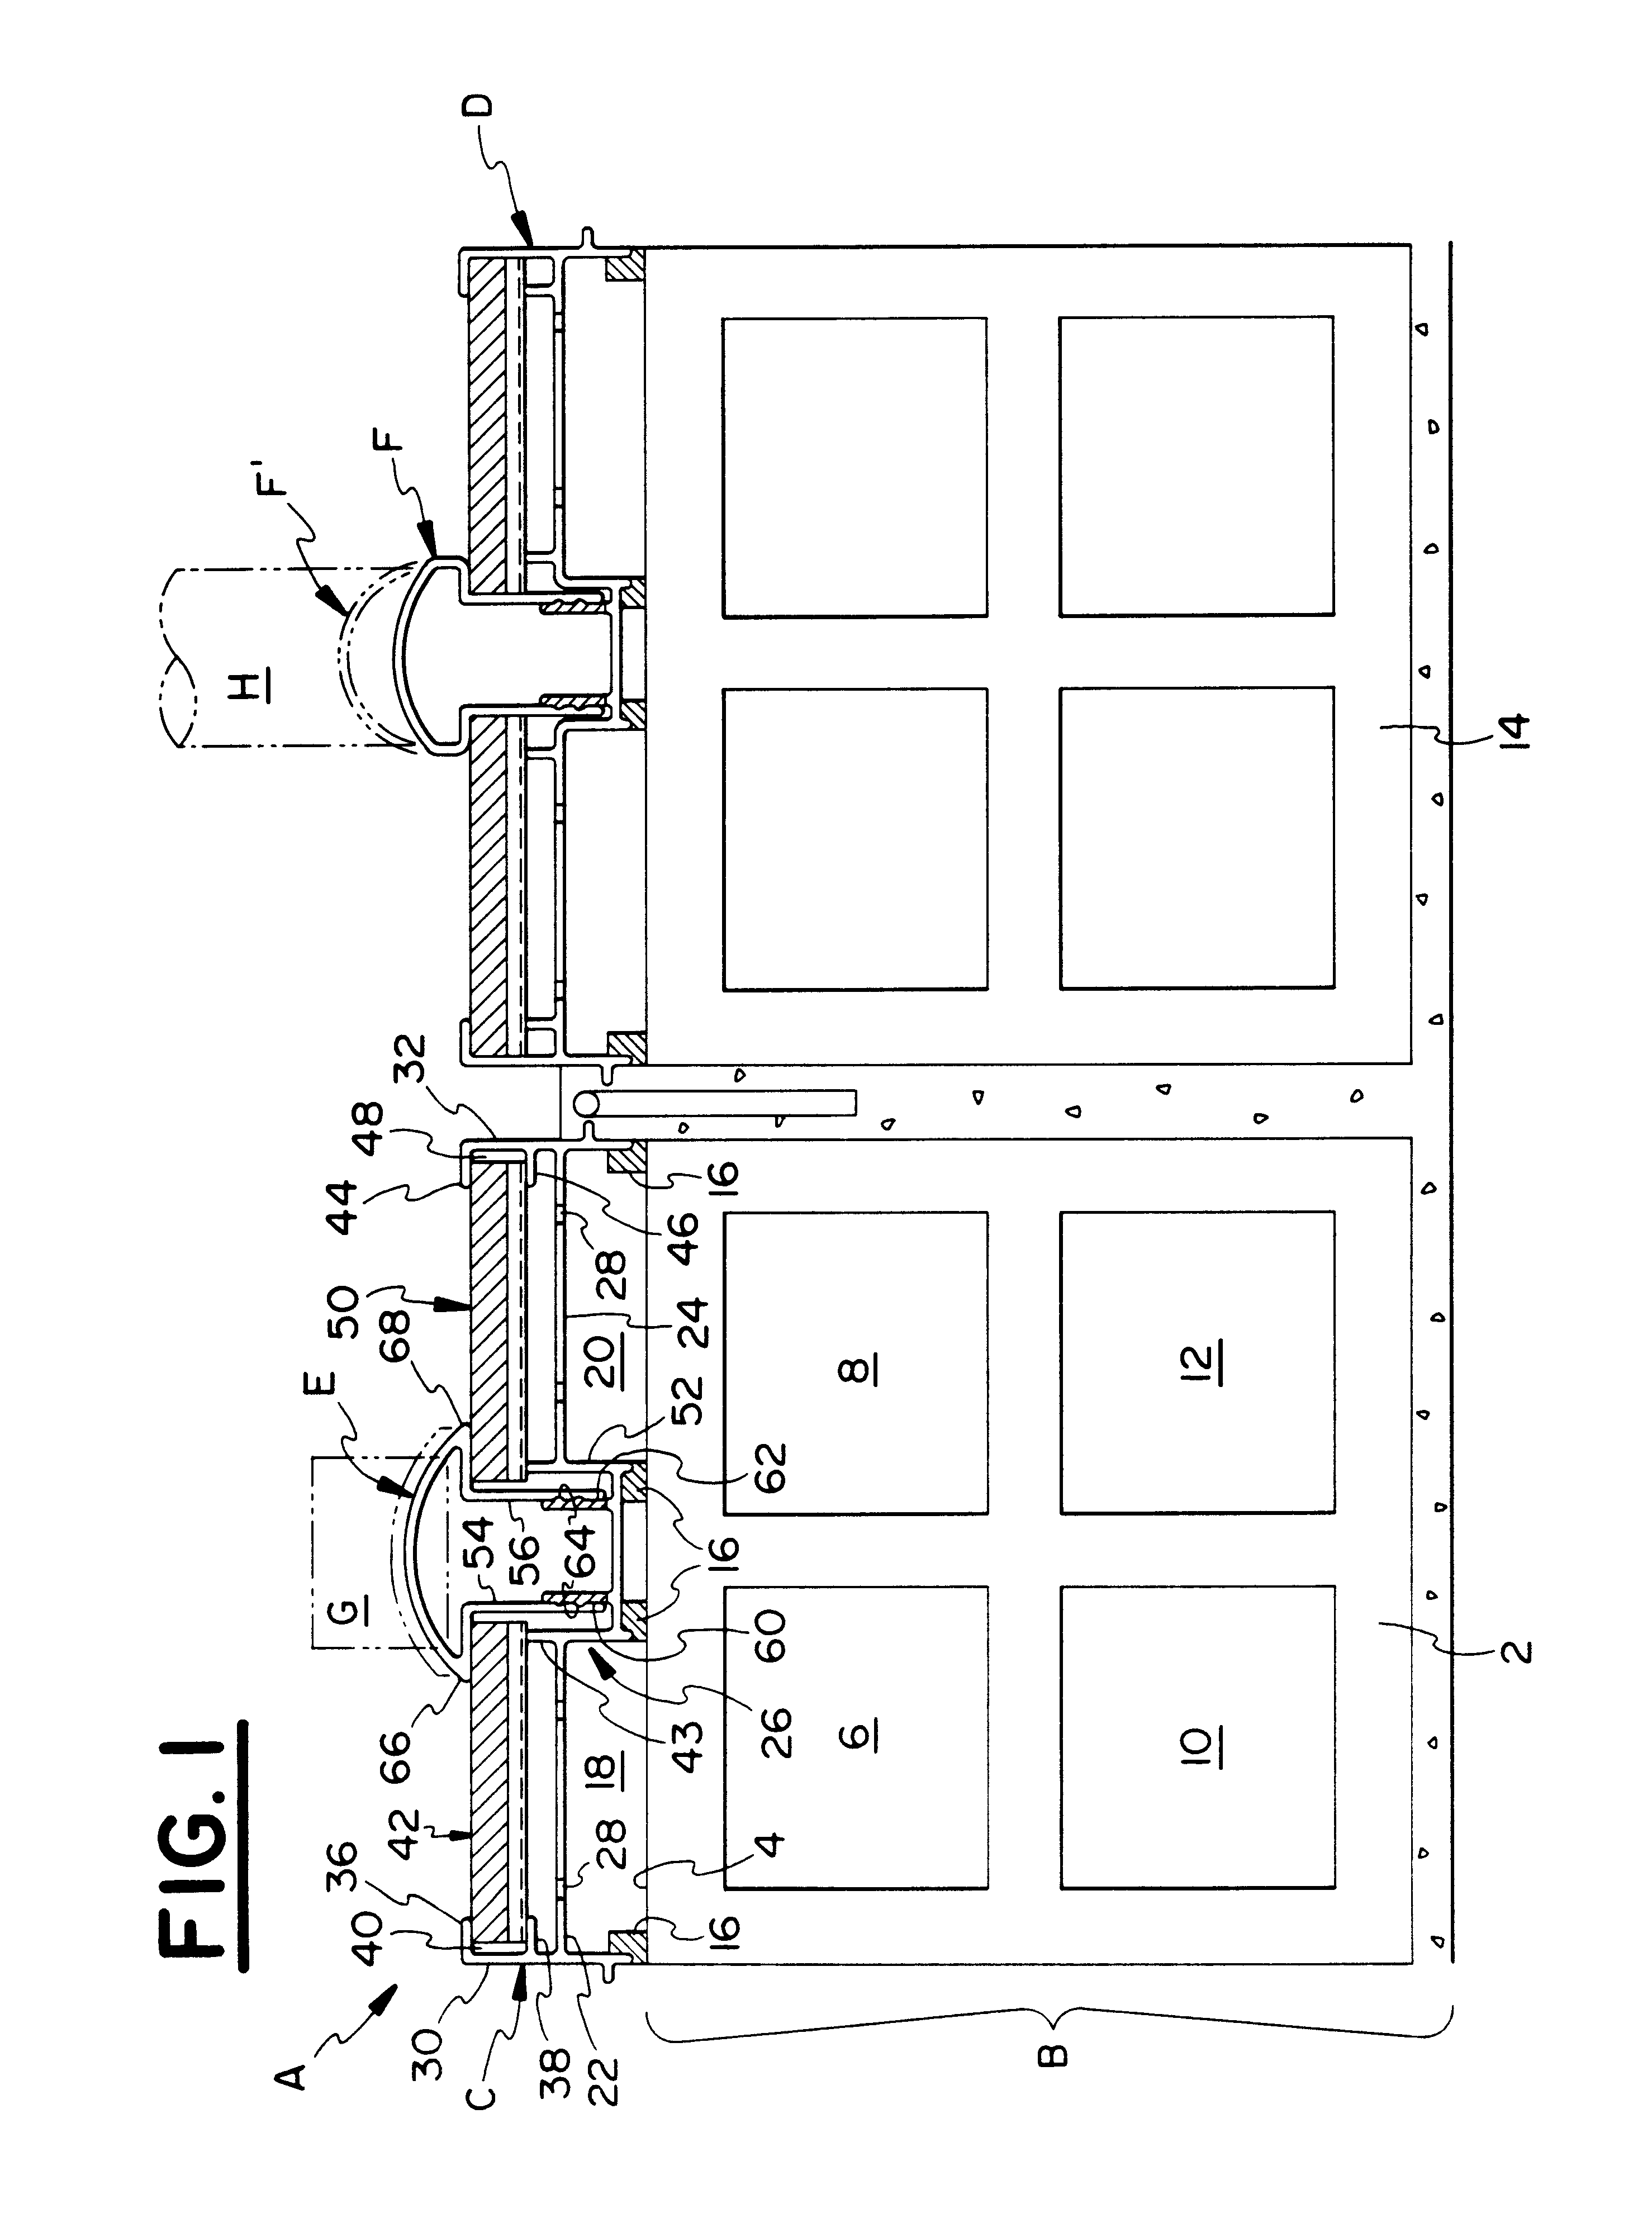 Apparatus for directing fluids through a filter system